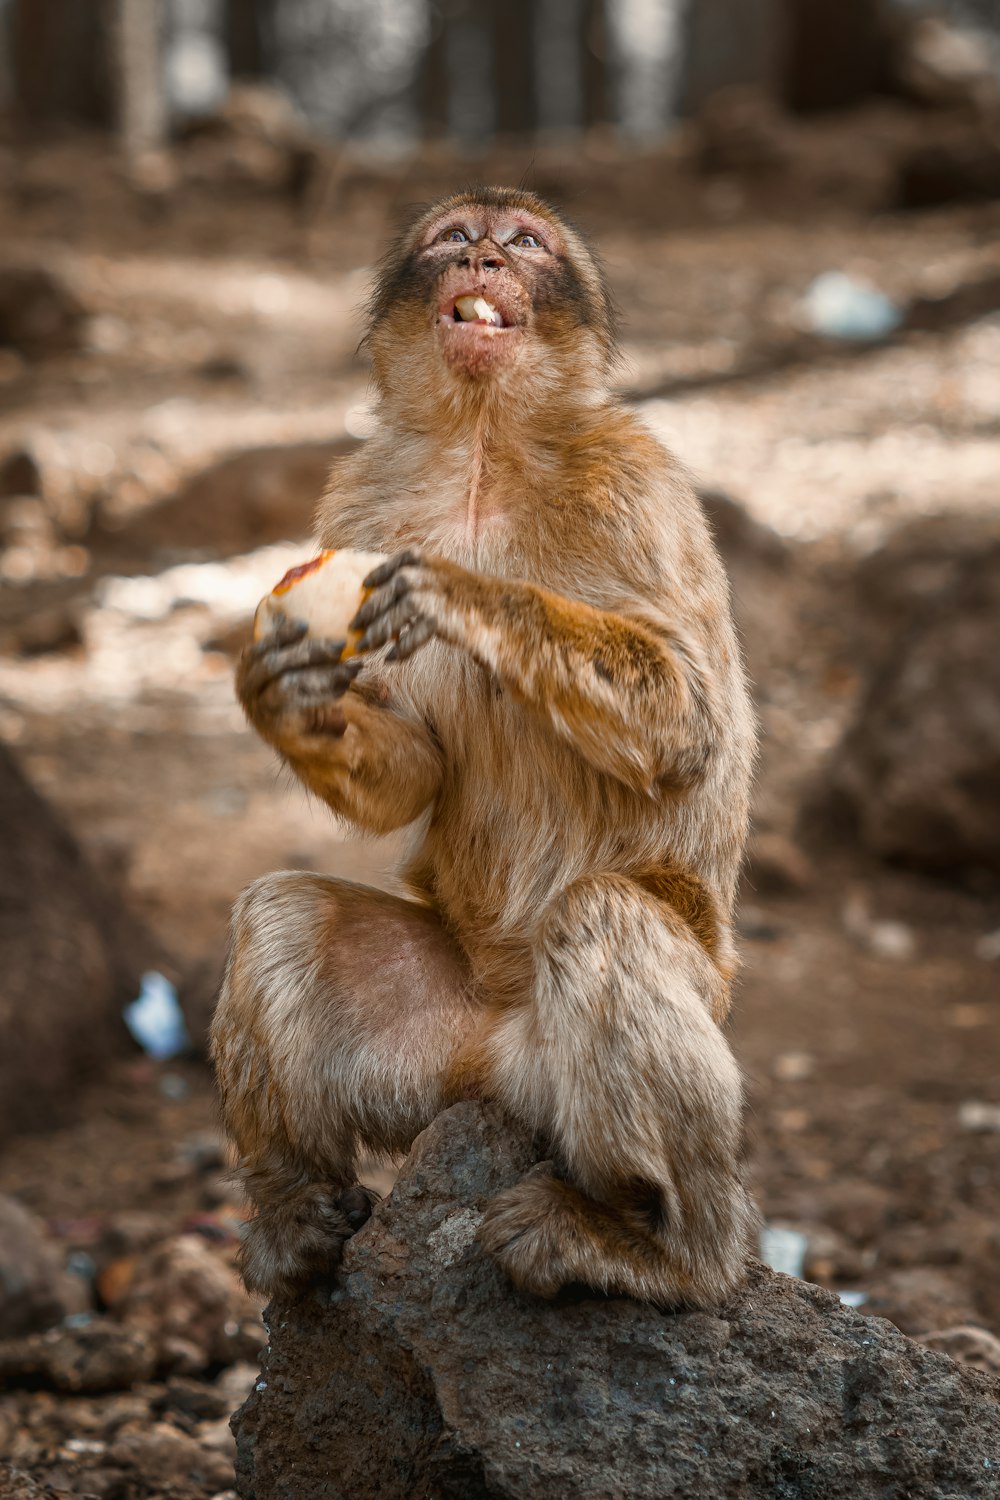 a monkey sitting on top of a rock eating something